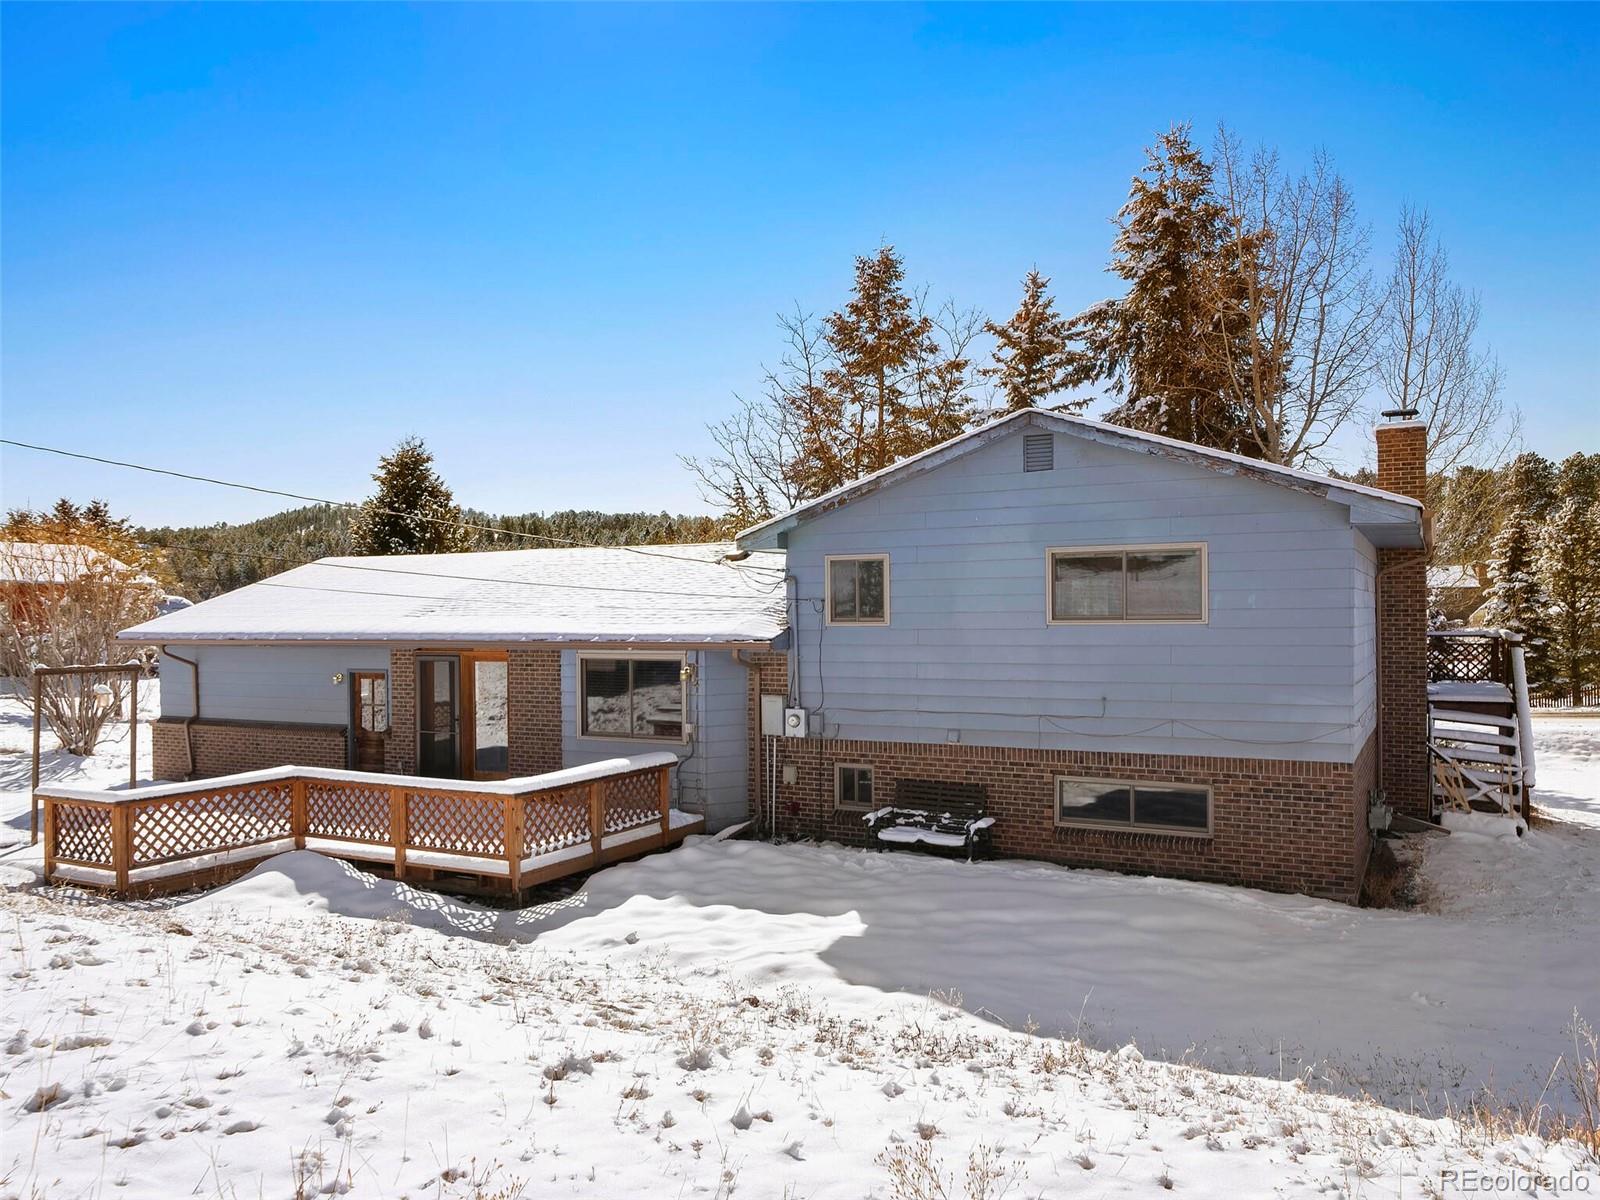 30091 Stagecoach, Evergreen, CO